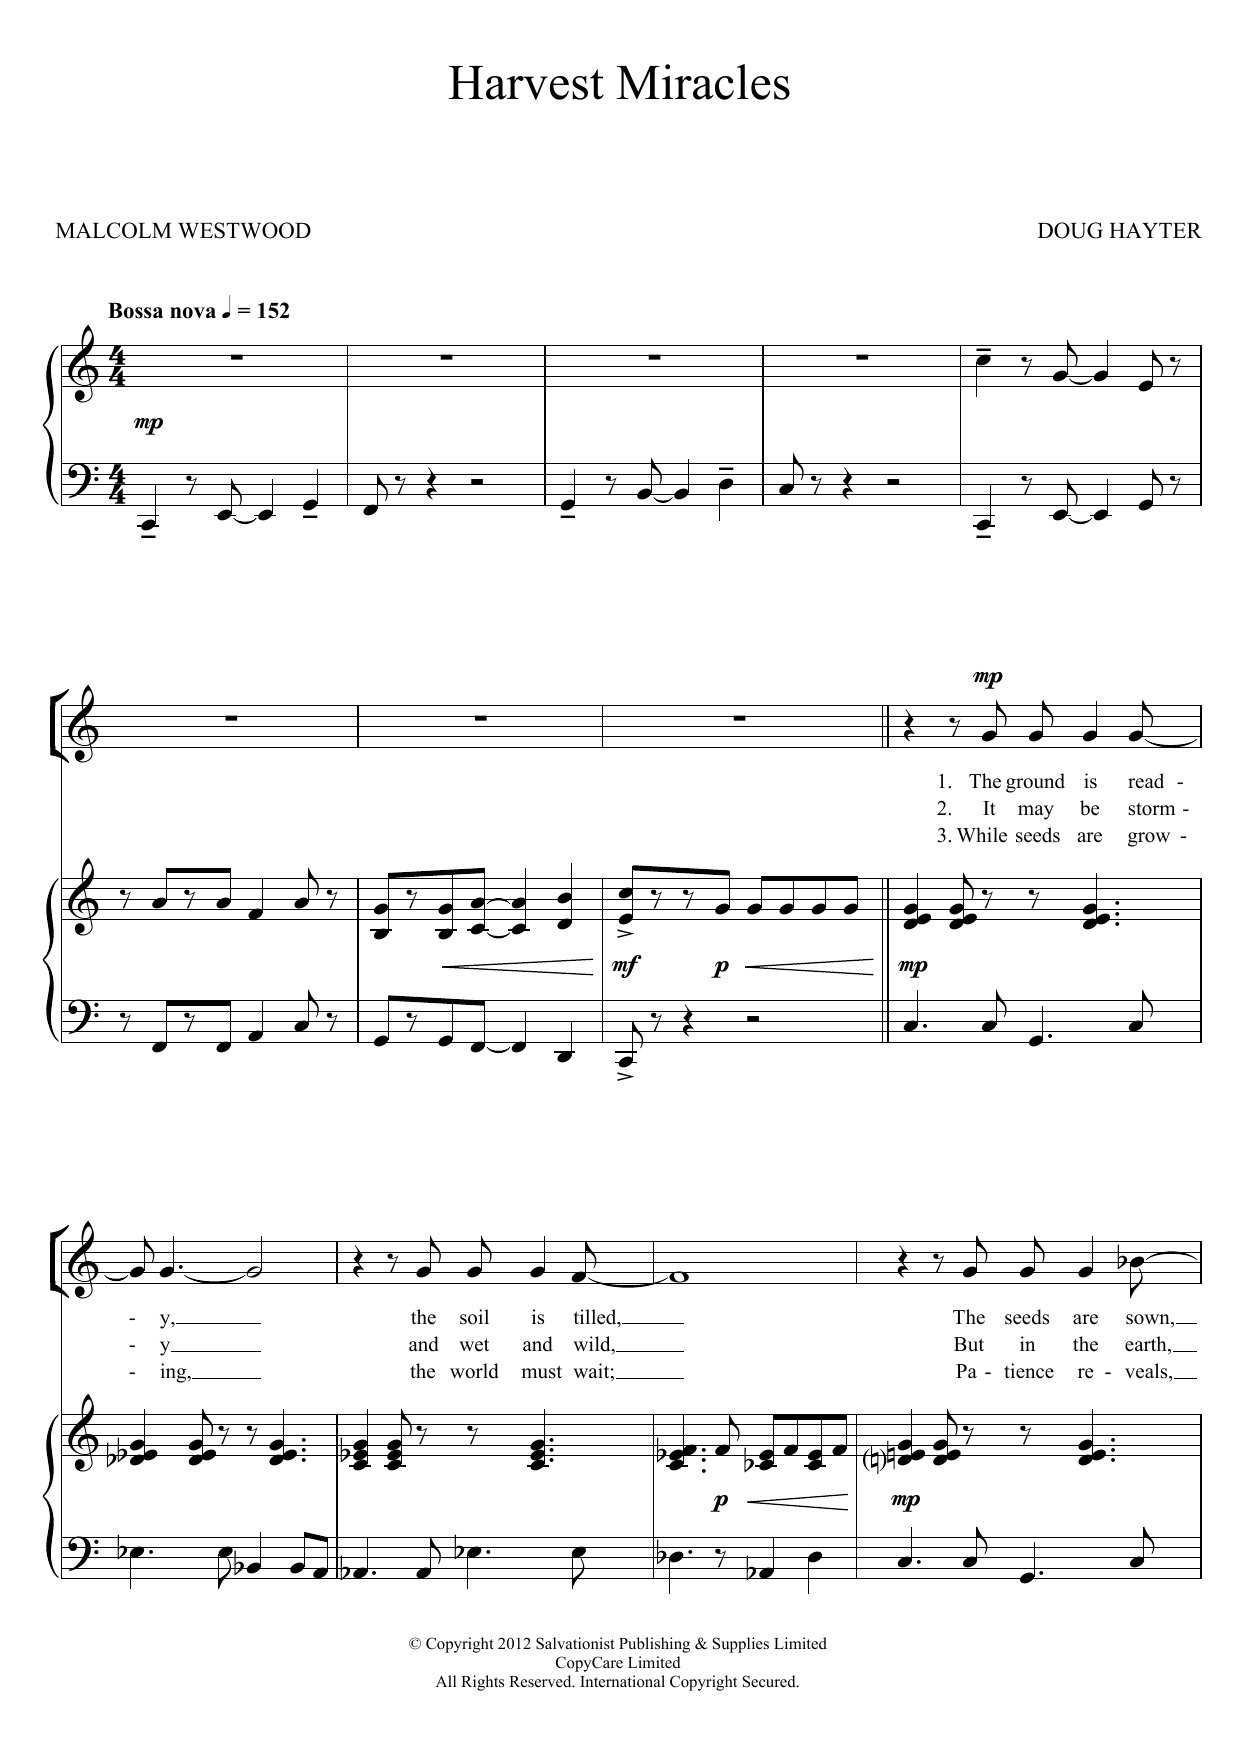 Download The Salvation Army Harvest Miracles Sheet Music